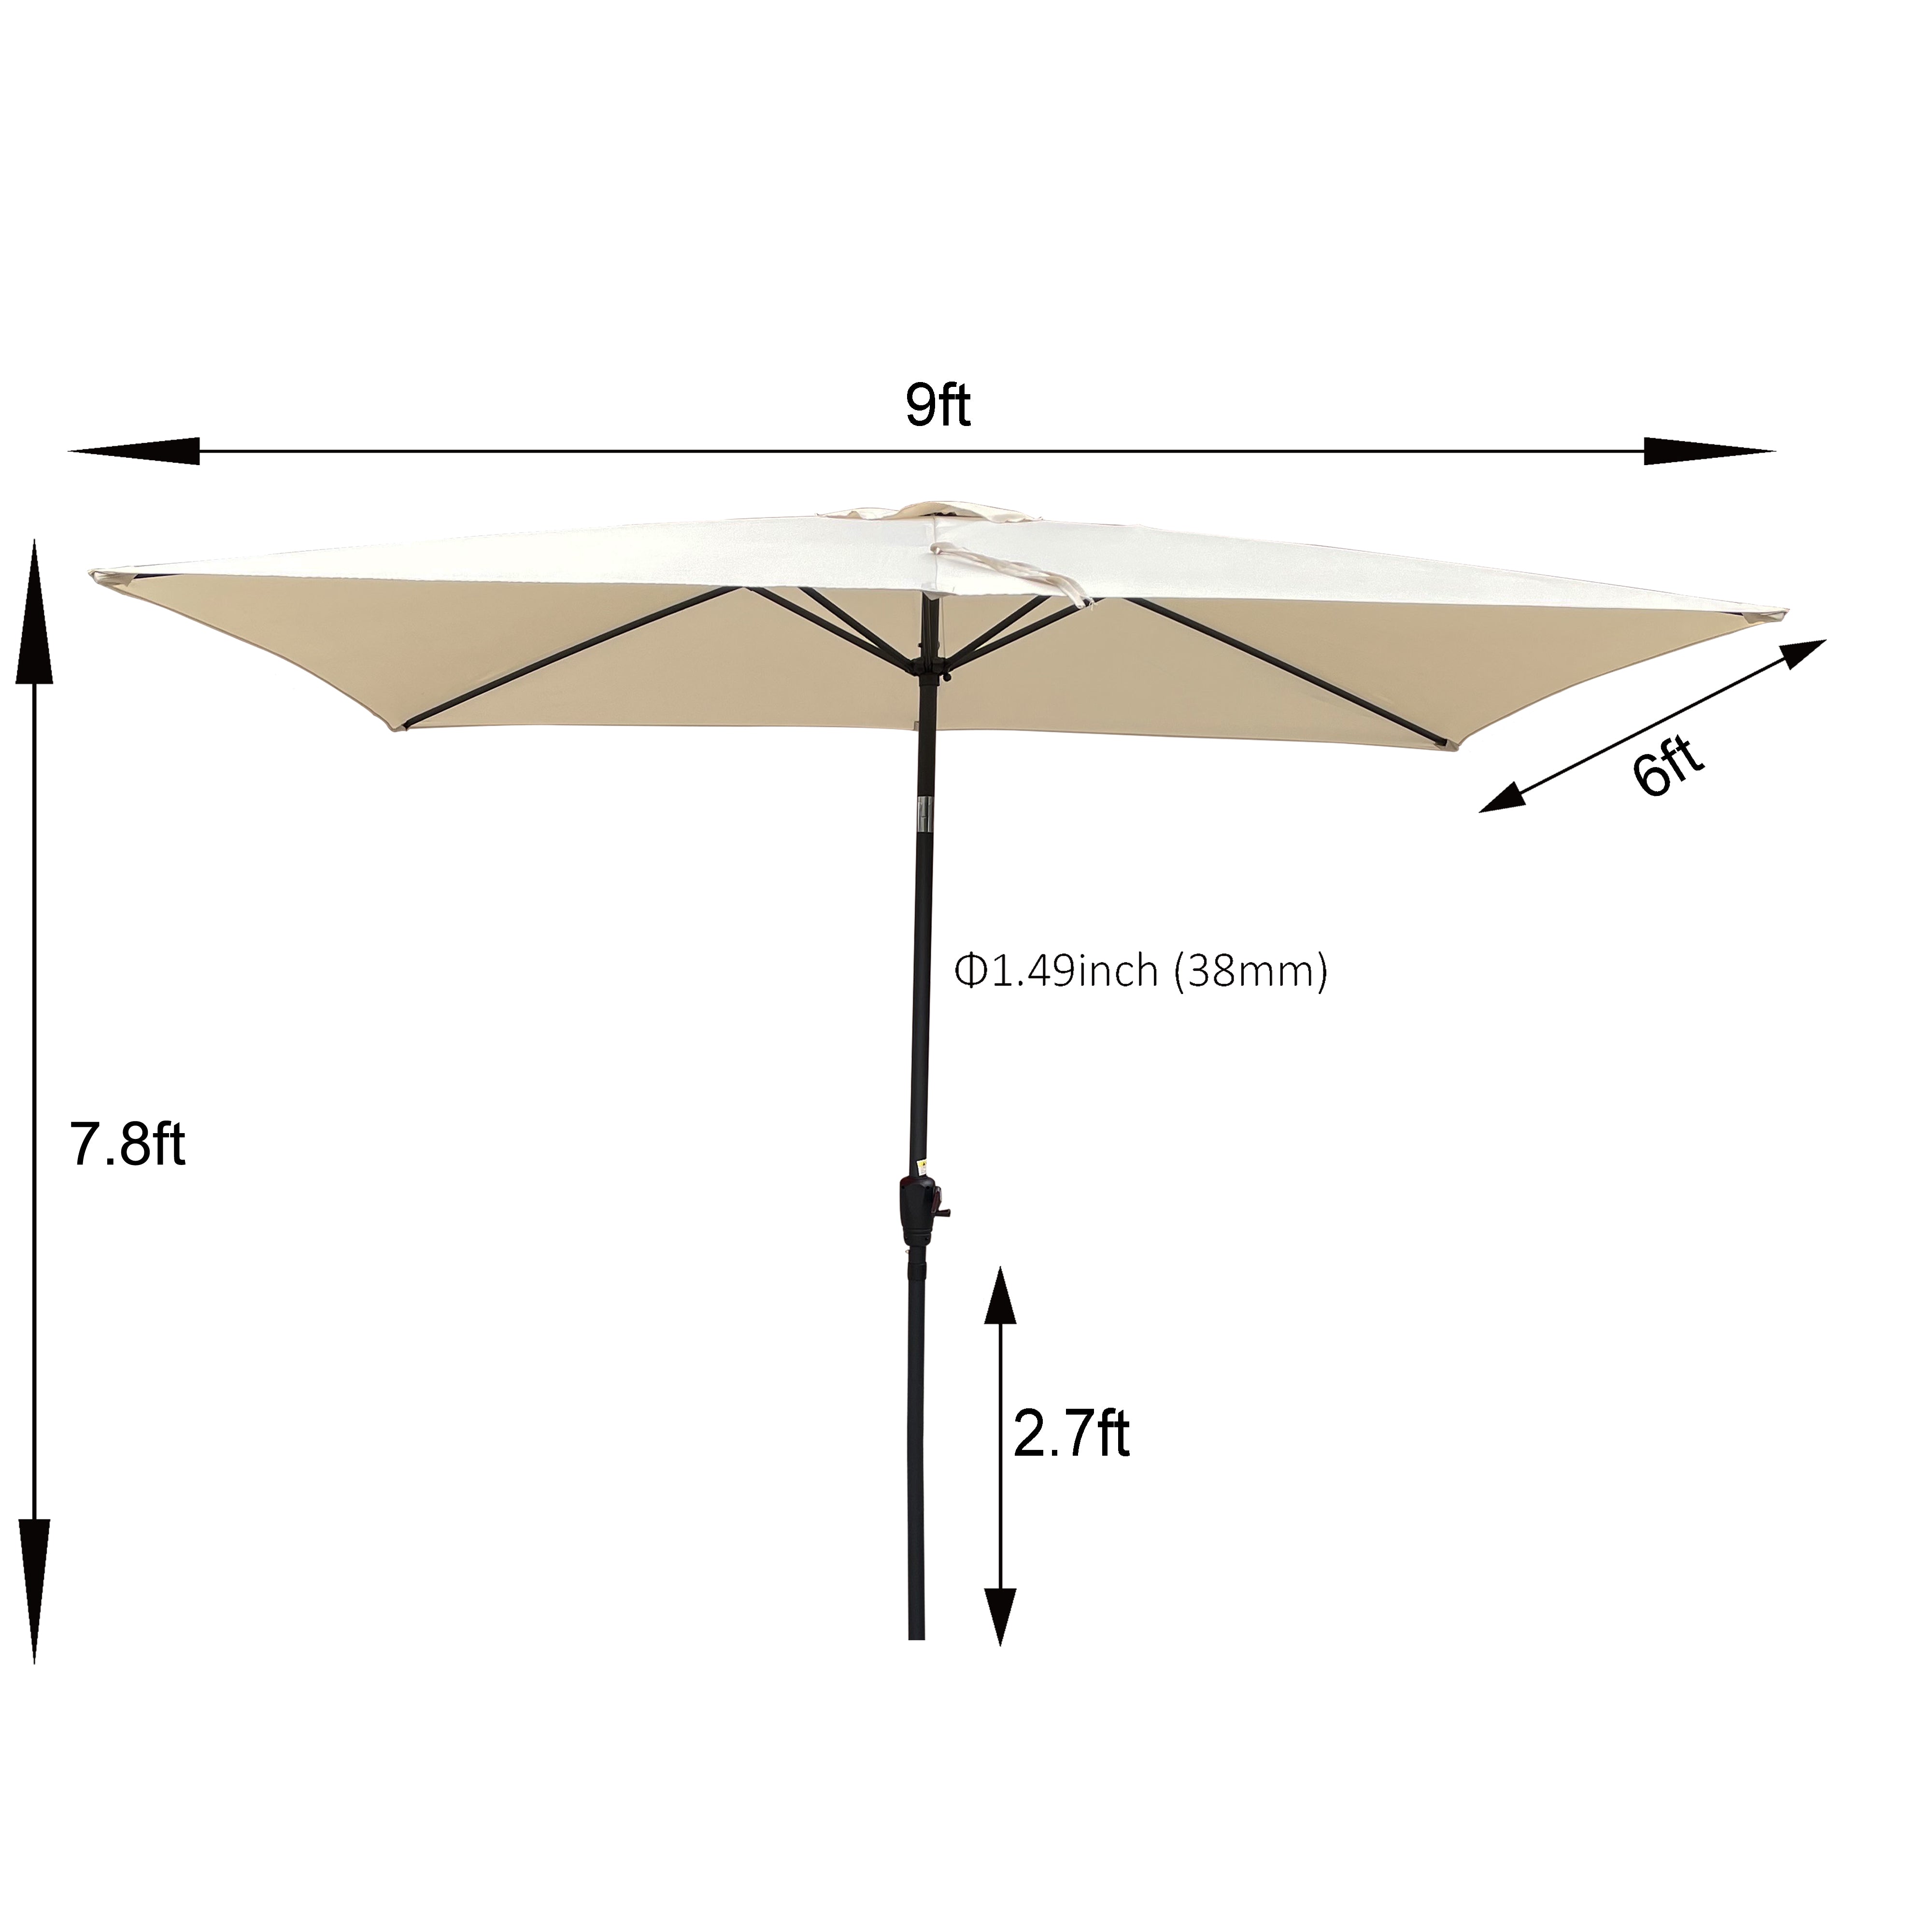 [KGORGE Plus]6' x 9' Outdoor Waterproof Patio Umbrella with Crank and Push Button Tilt without flap for Garden Backyard Pool Swimming Pool